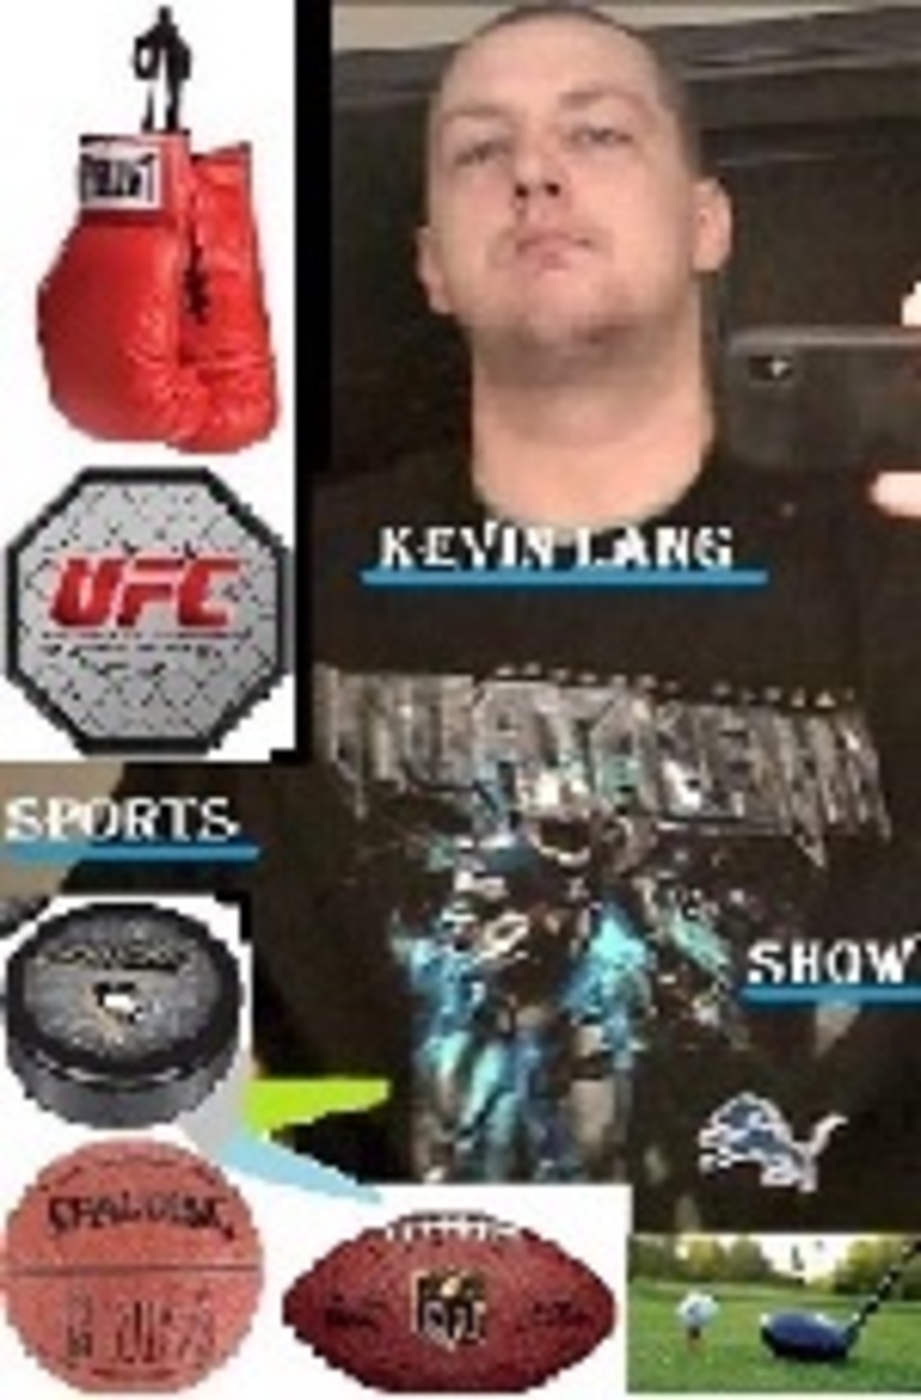 The Kevin Lang Sports Show